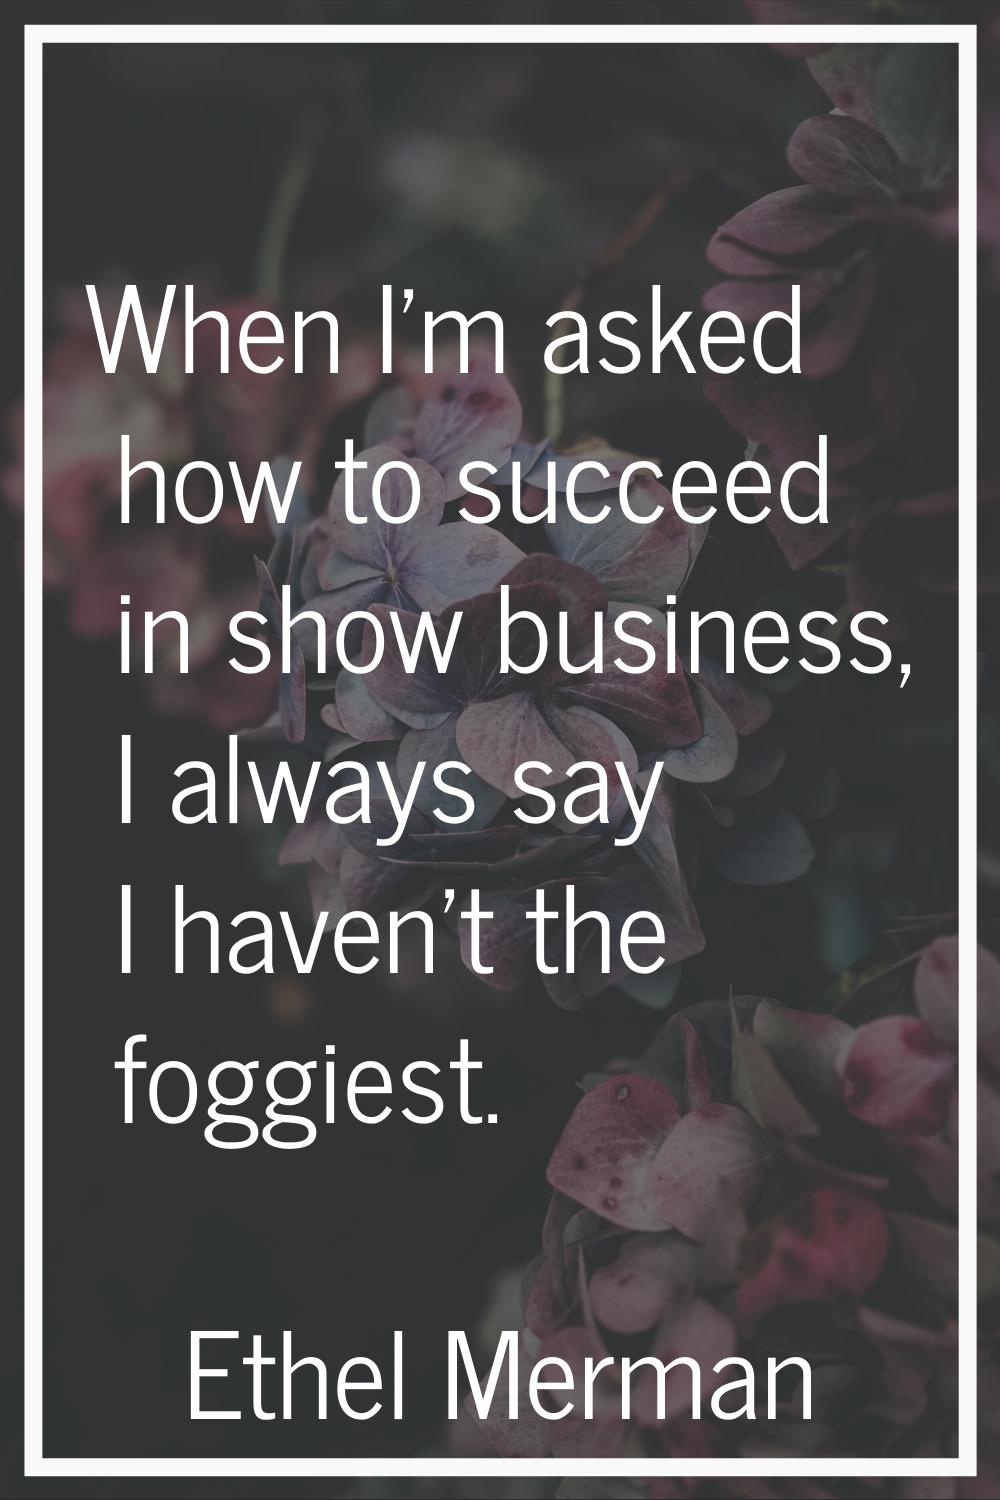 When I'm asked how to succeed in show business, I always say I haven't the foggiest.